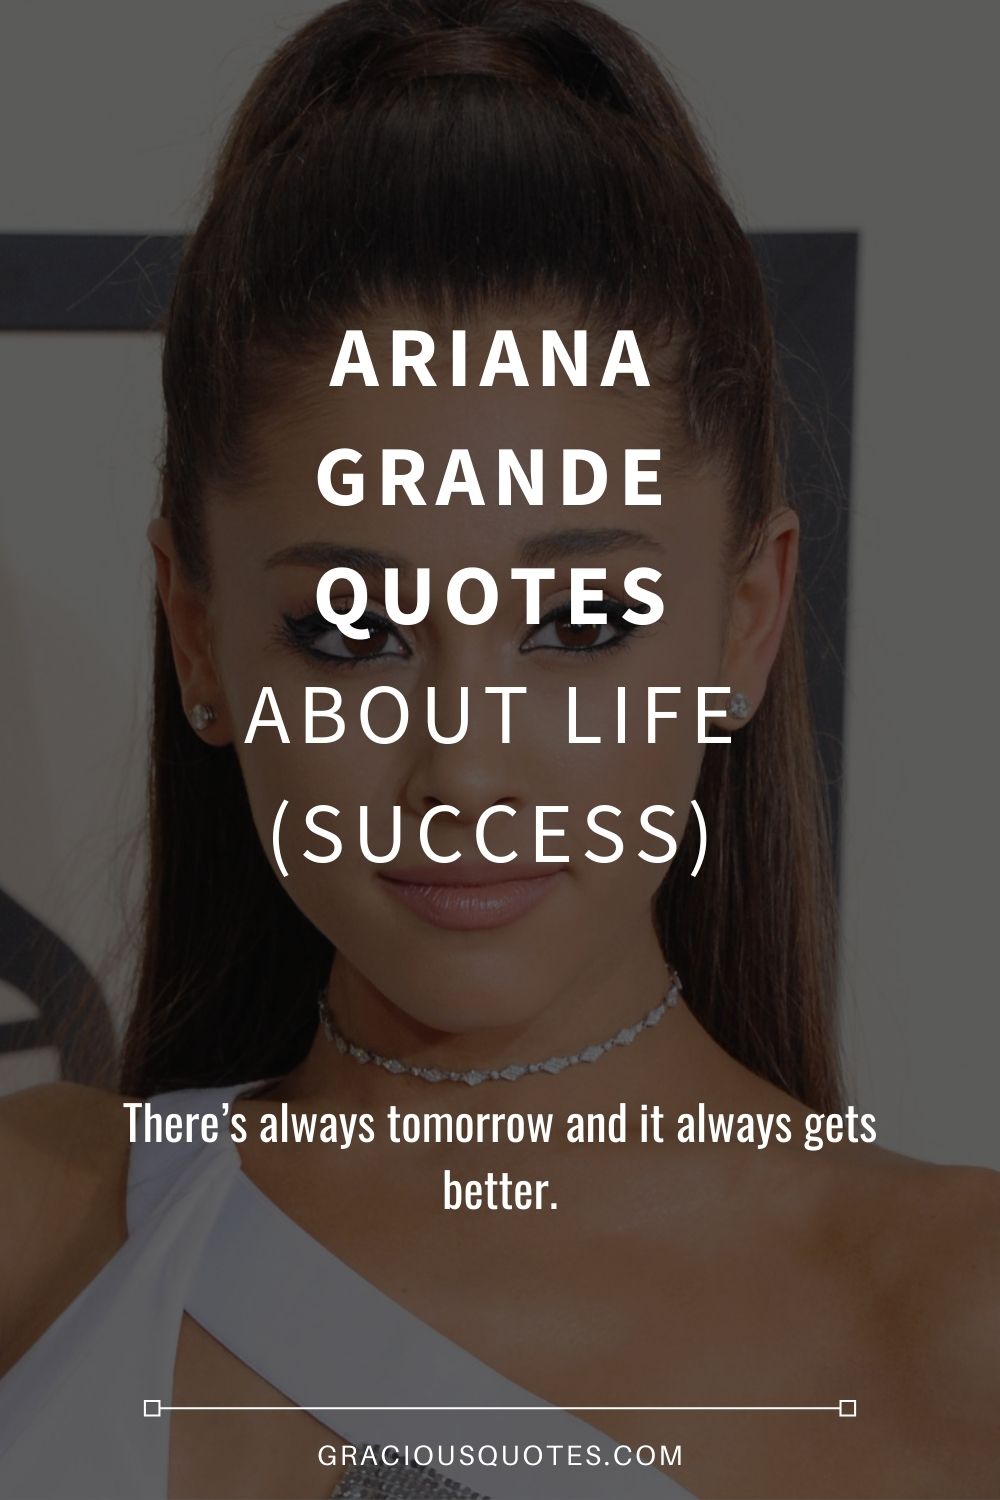 46 Ariana Grande Quotes About Life (SUCCESS)